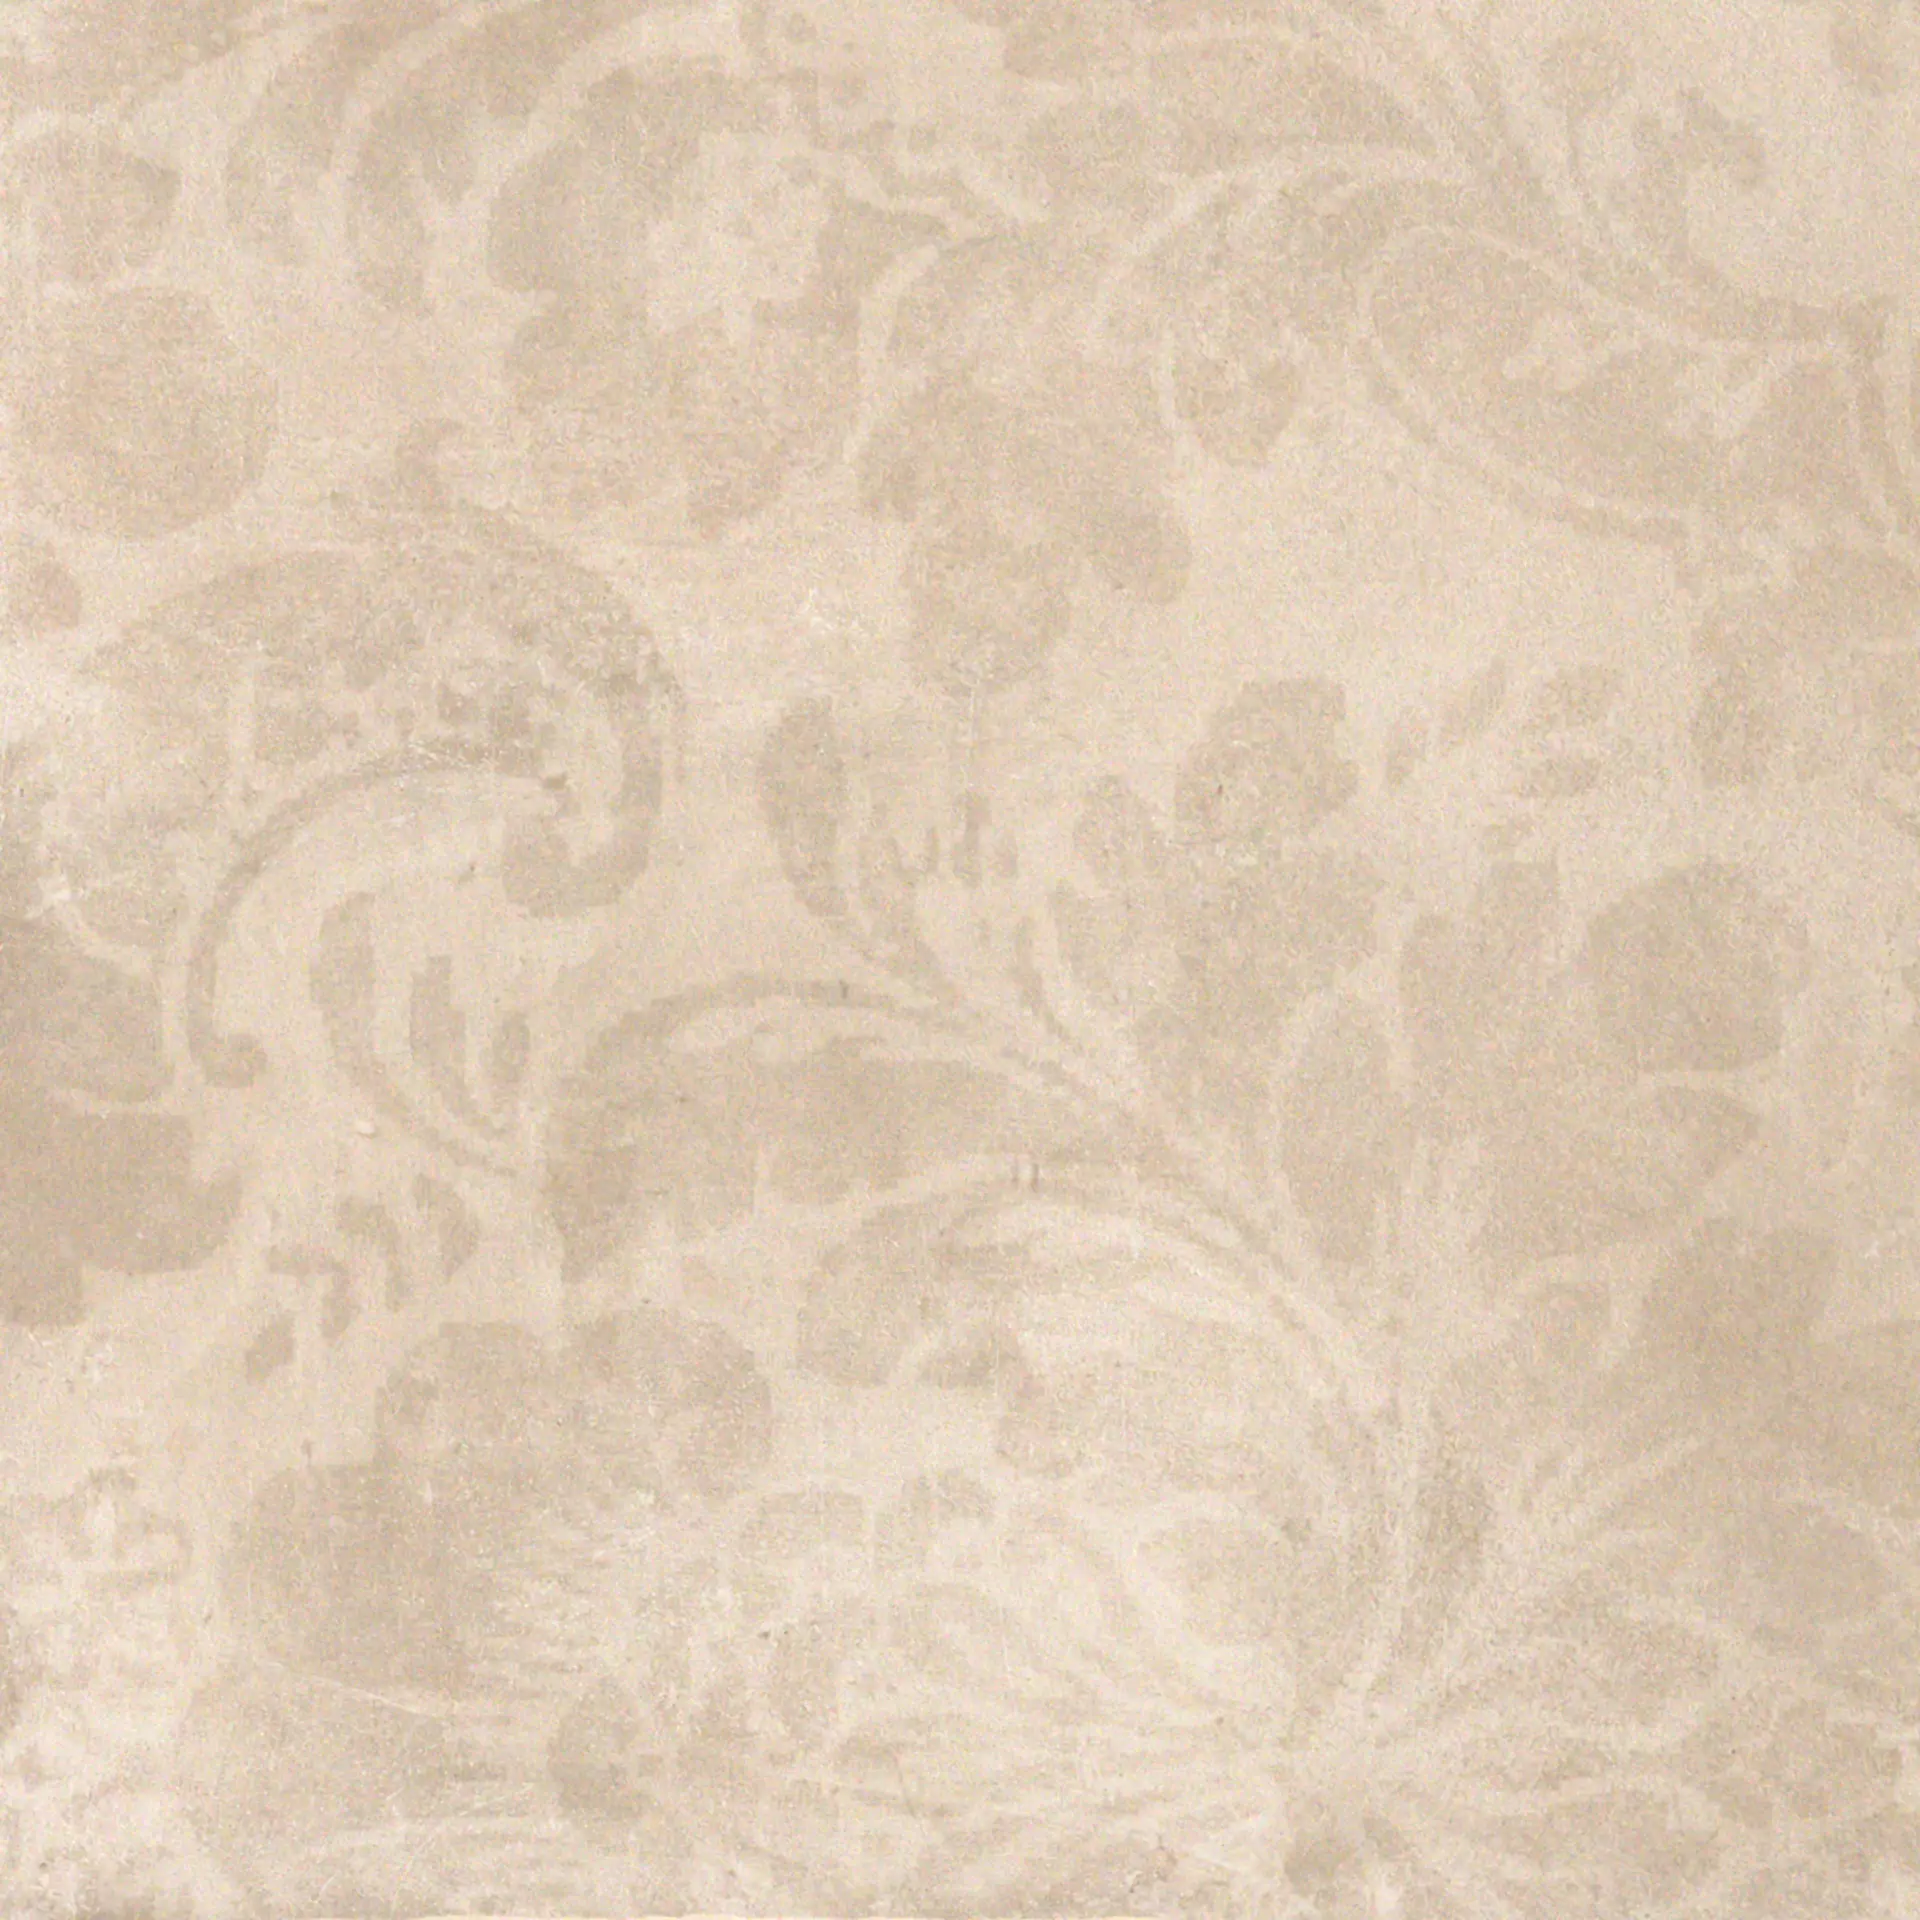 Fondovalle Portland Helen Natural Decorated PTL375 80x80cm rectified 8,5mm